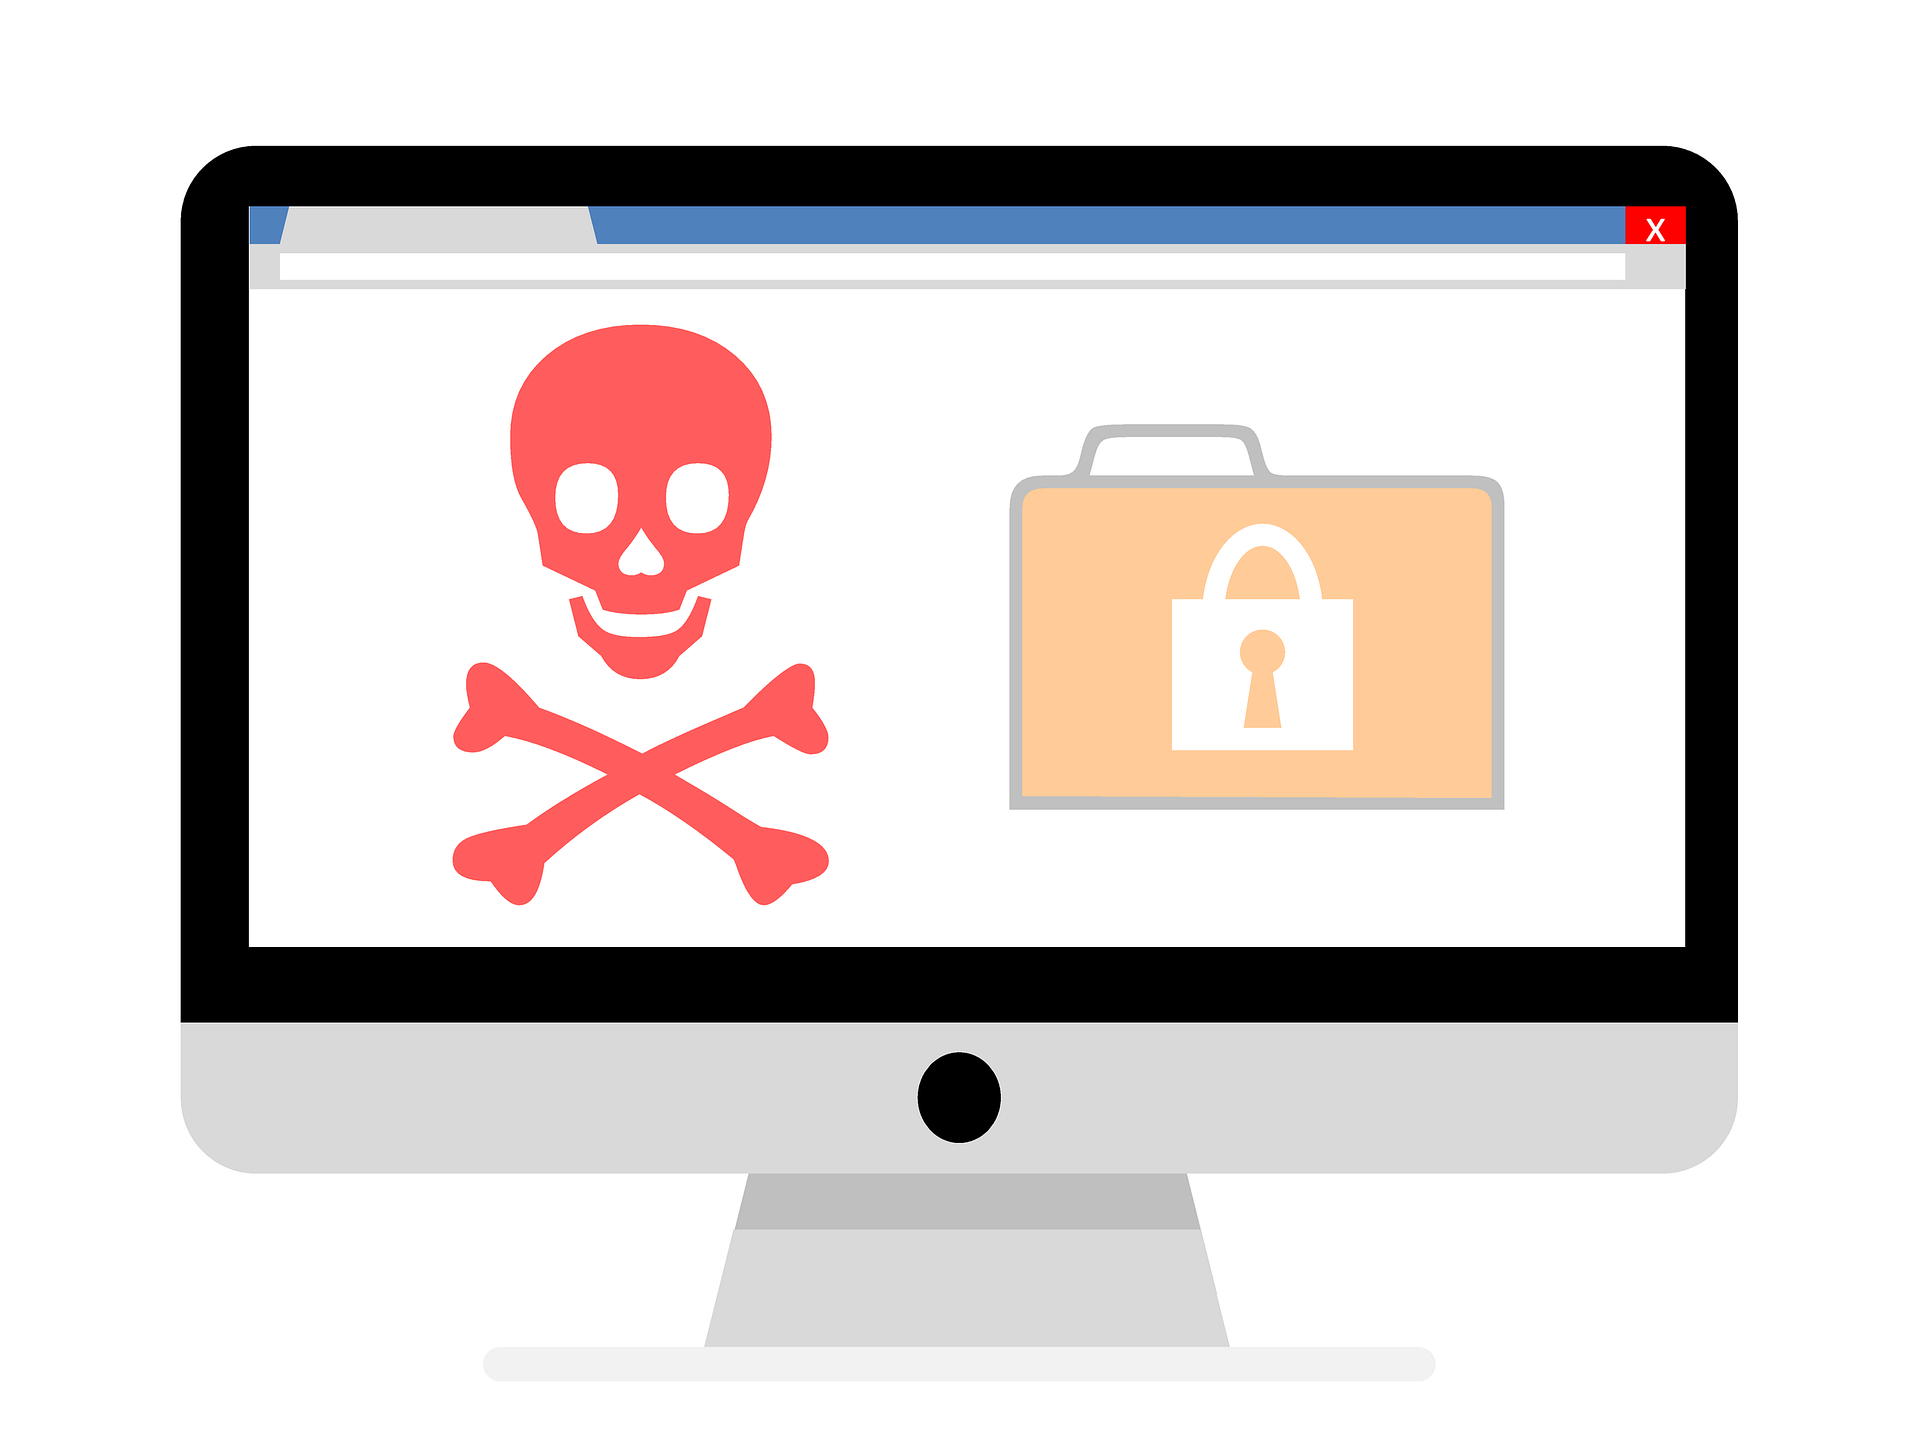 [Heads up] Ransomware V2.0 Is Set to Resurge As Your Insurance Now Pays Off The Ransom